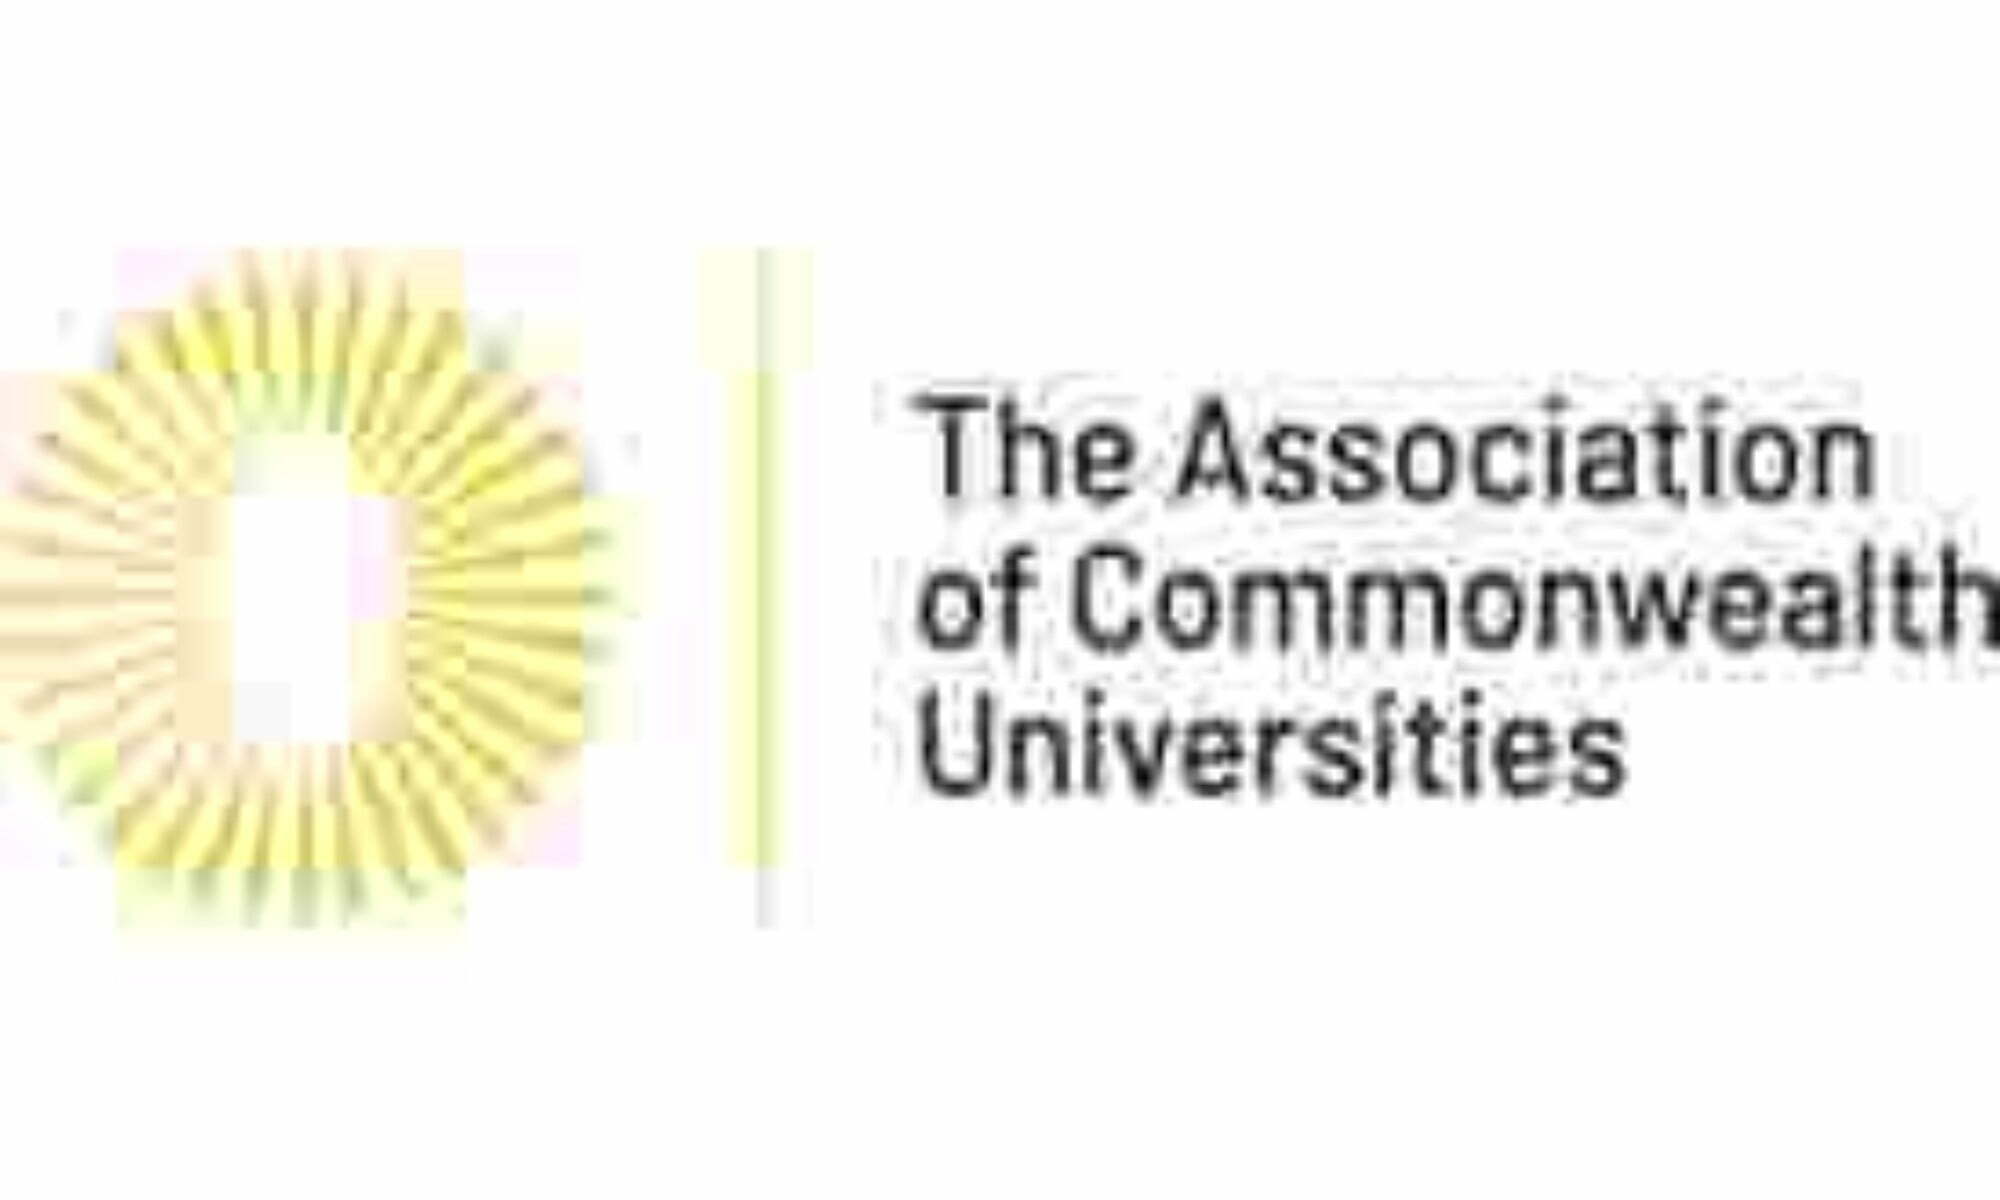 Commonwealth Countries ACU Queen Elizabeth Commonwealth Scholarships for Masters Students 2022